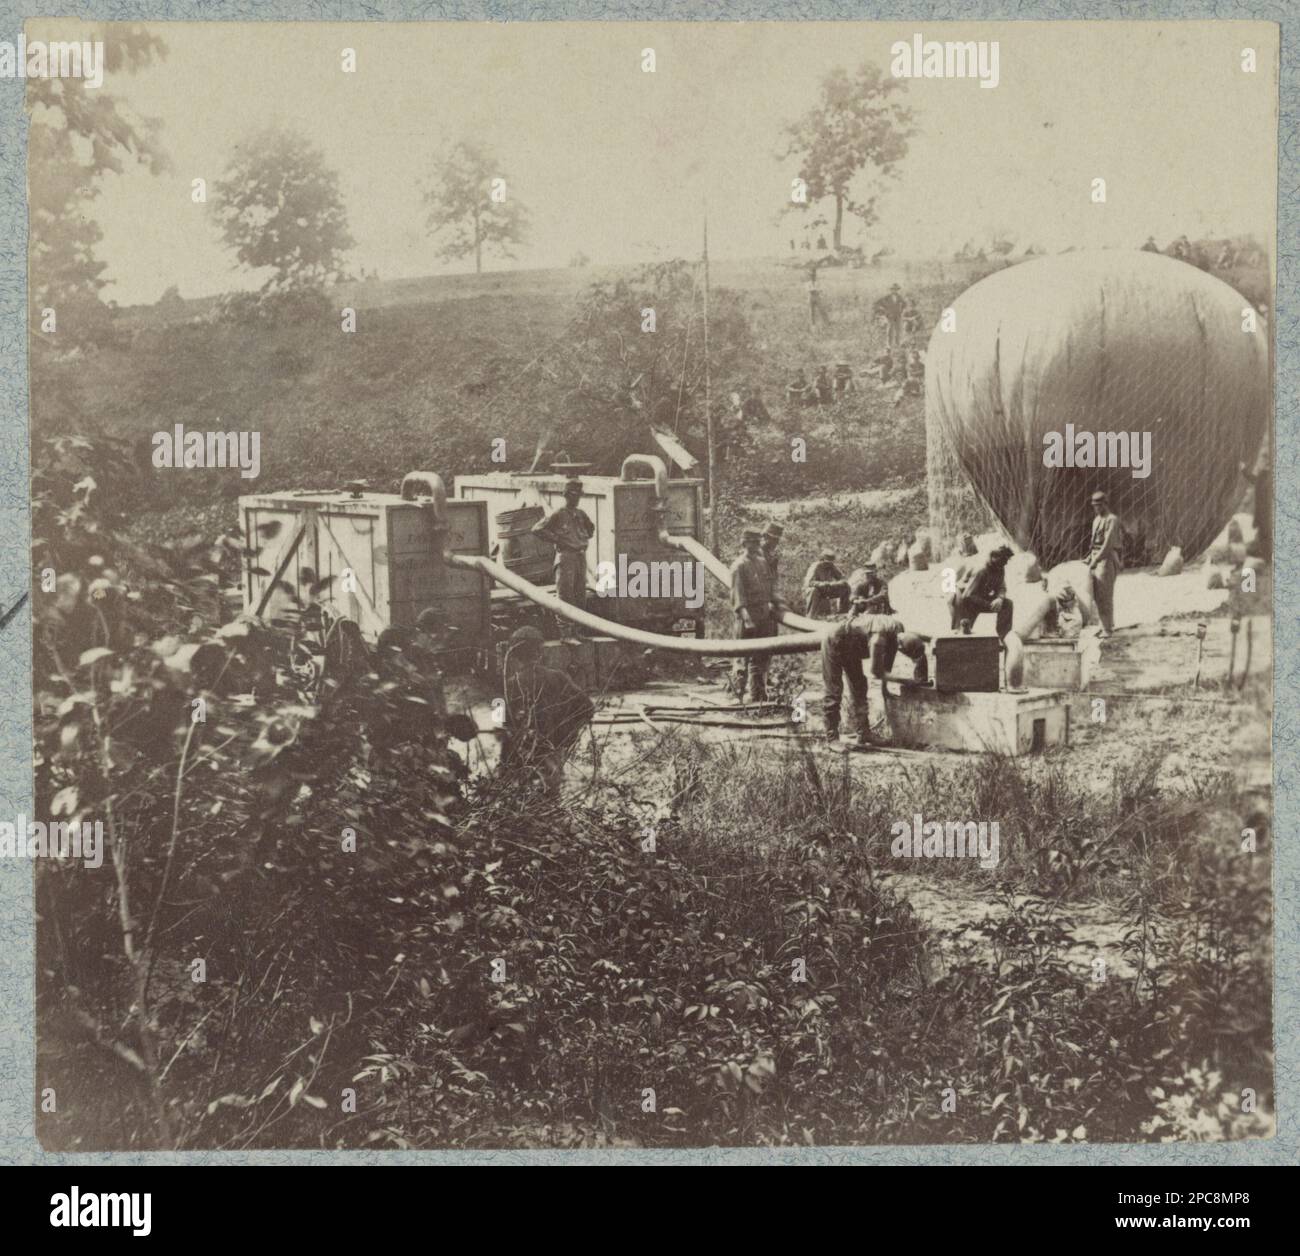 This photograph captures the historic moment when the balloon Intrepid was inflated to conduct reconnaissance of the Battle of Fair Oaks during the Civil War. The image is part of a series of six photographs documenting Prof. Lowe's military balloons near Gaines Mill, Virginia. As one of the earliest instances of aerial reconnaissance in warfare, this image provides a glimpse into the innovative tactics used during the Civil War. It is a testament to the resourcefulness of both sides and their constant quest for an advantage on the battlefield. Stock Photo